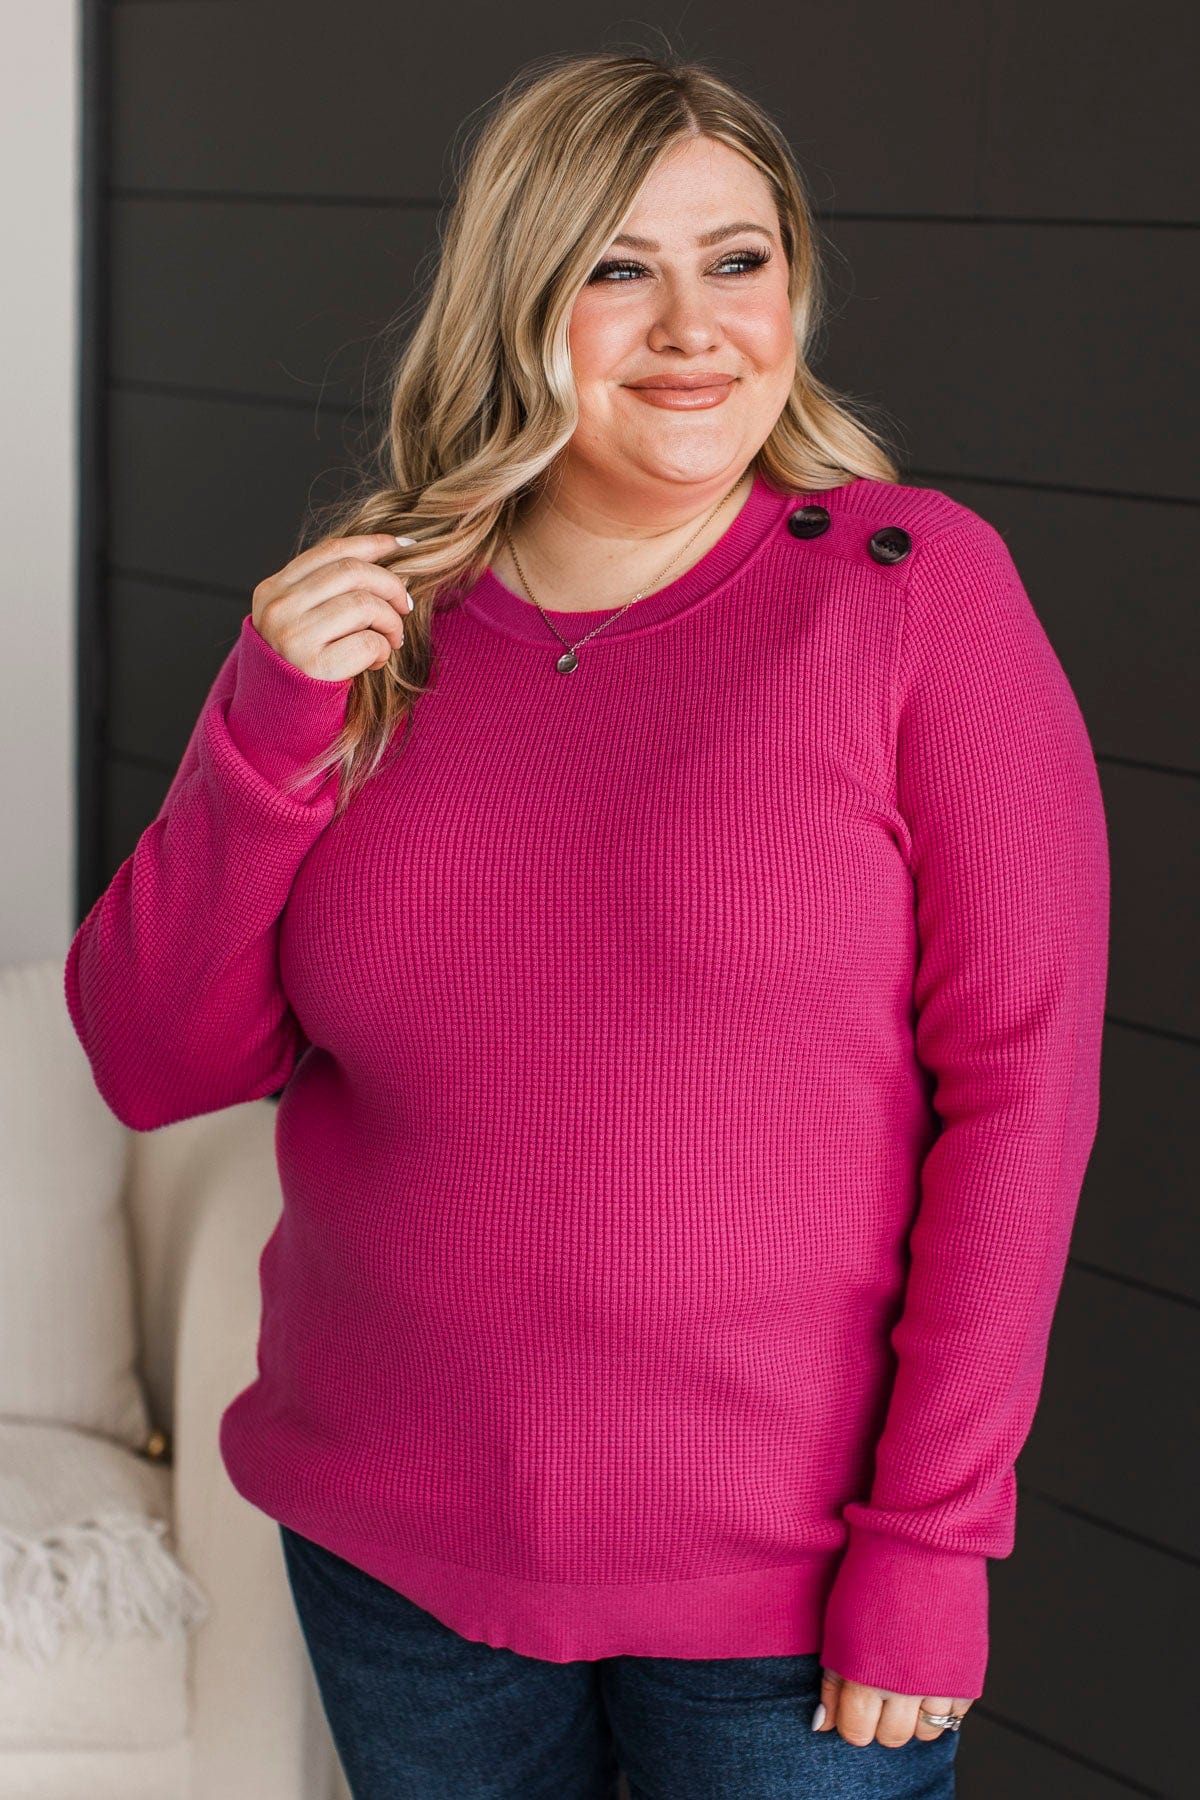 Reasons To Smile Knit Sweater- Hot Pink